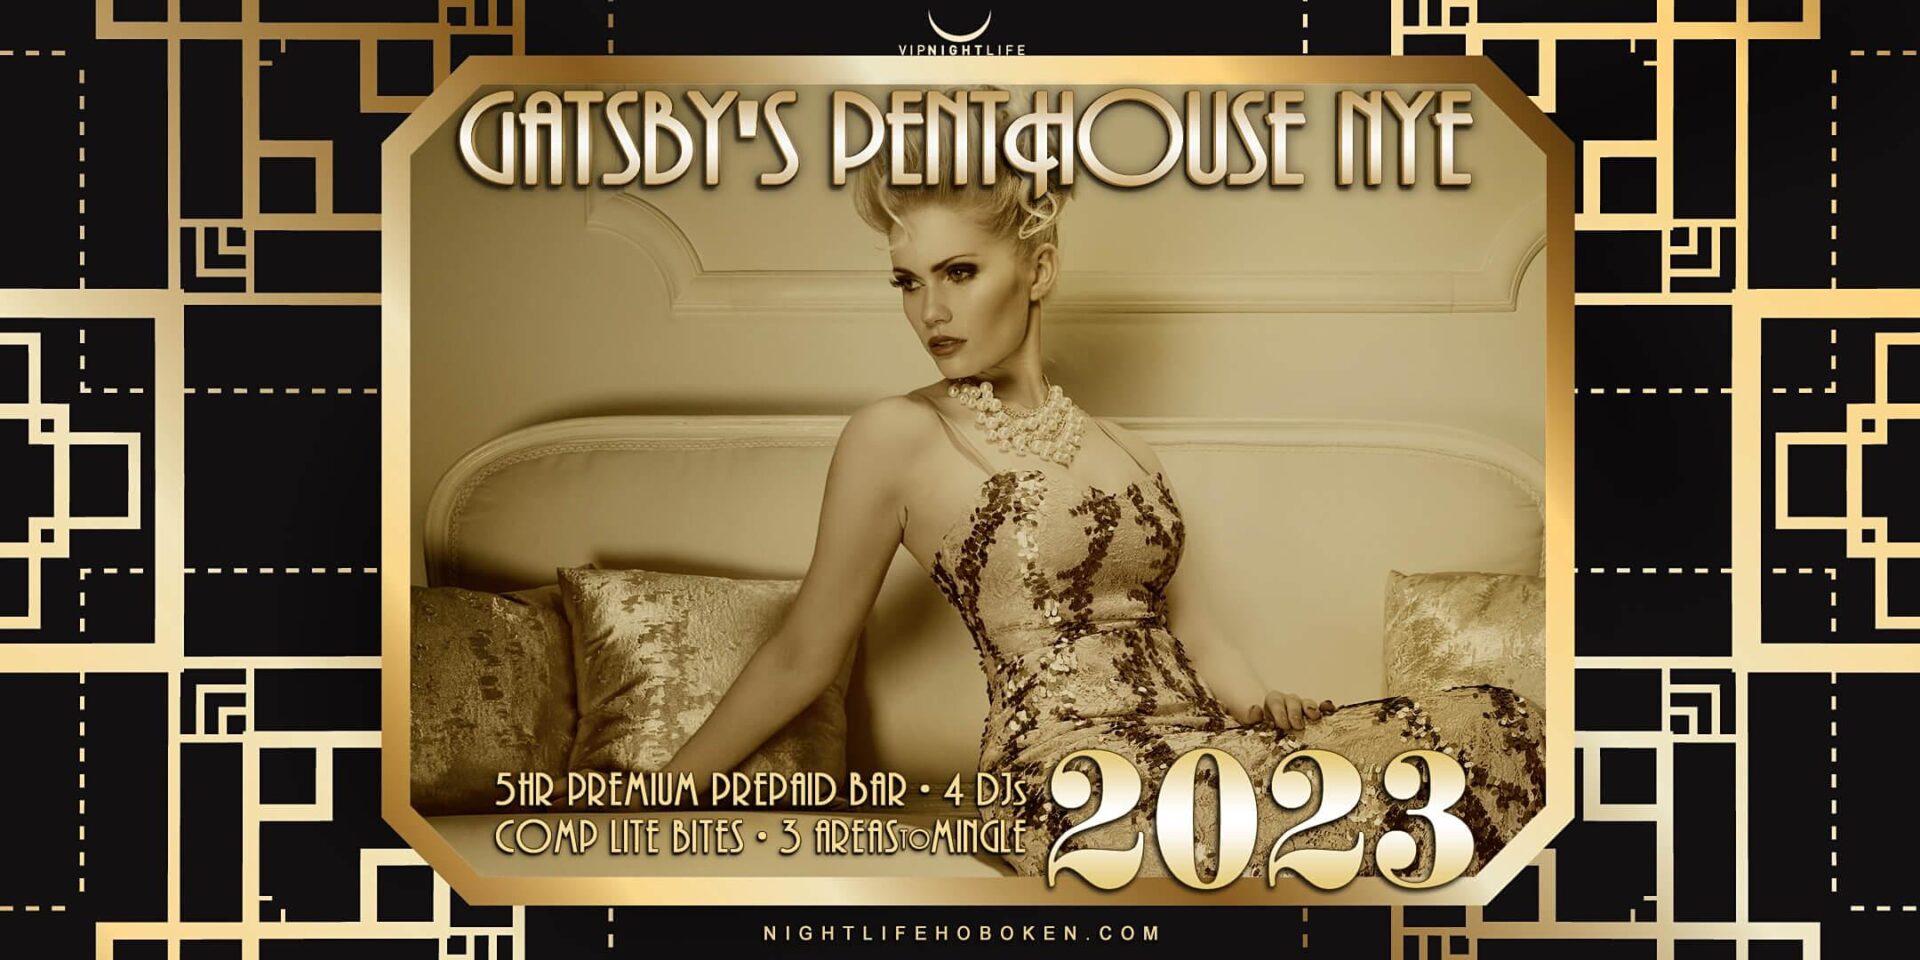 Hoboken New Year's Eve Party 2023 Gatsby's Penthouse VIP Nightlife